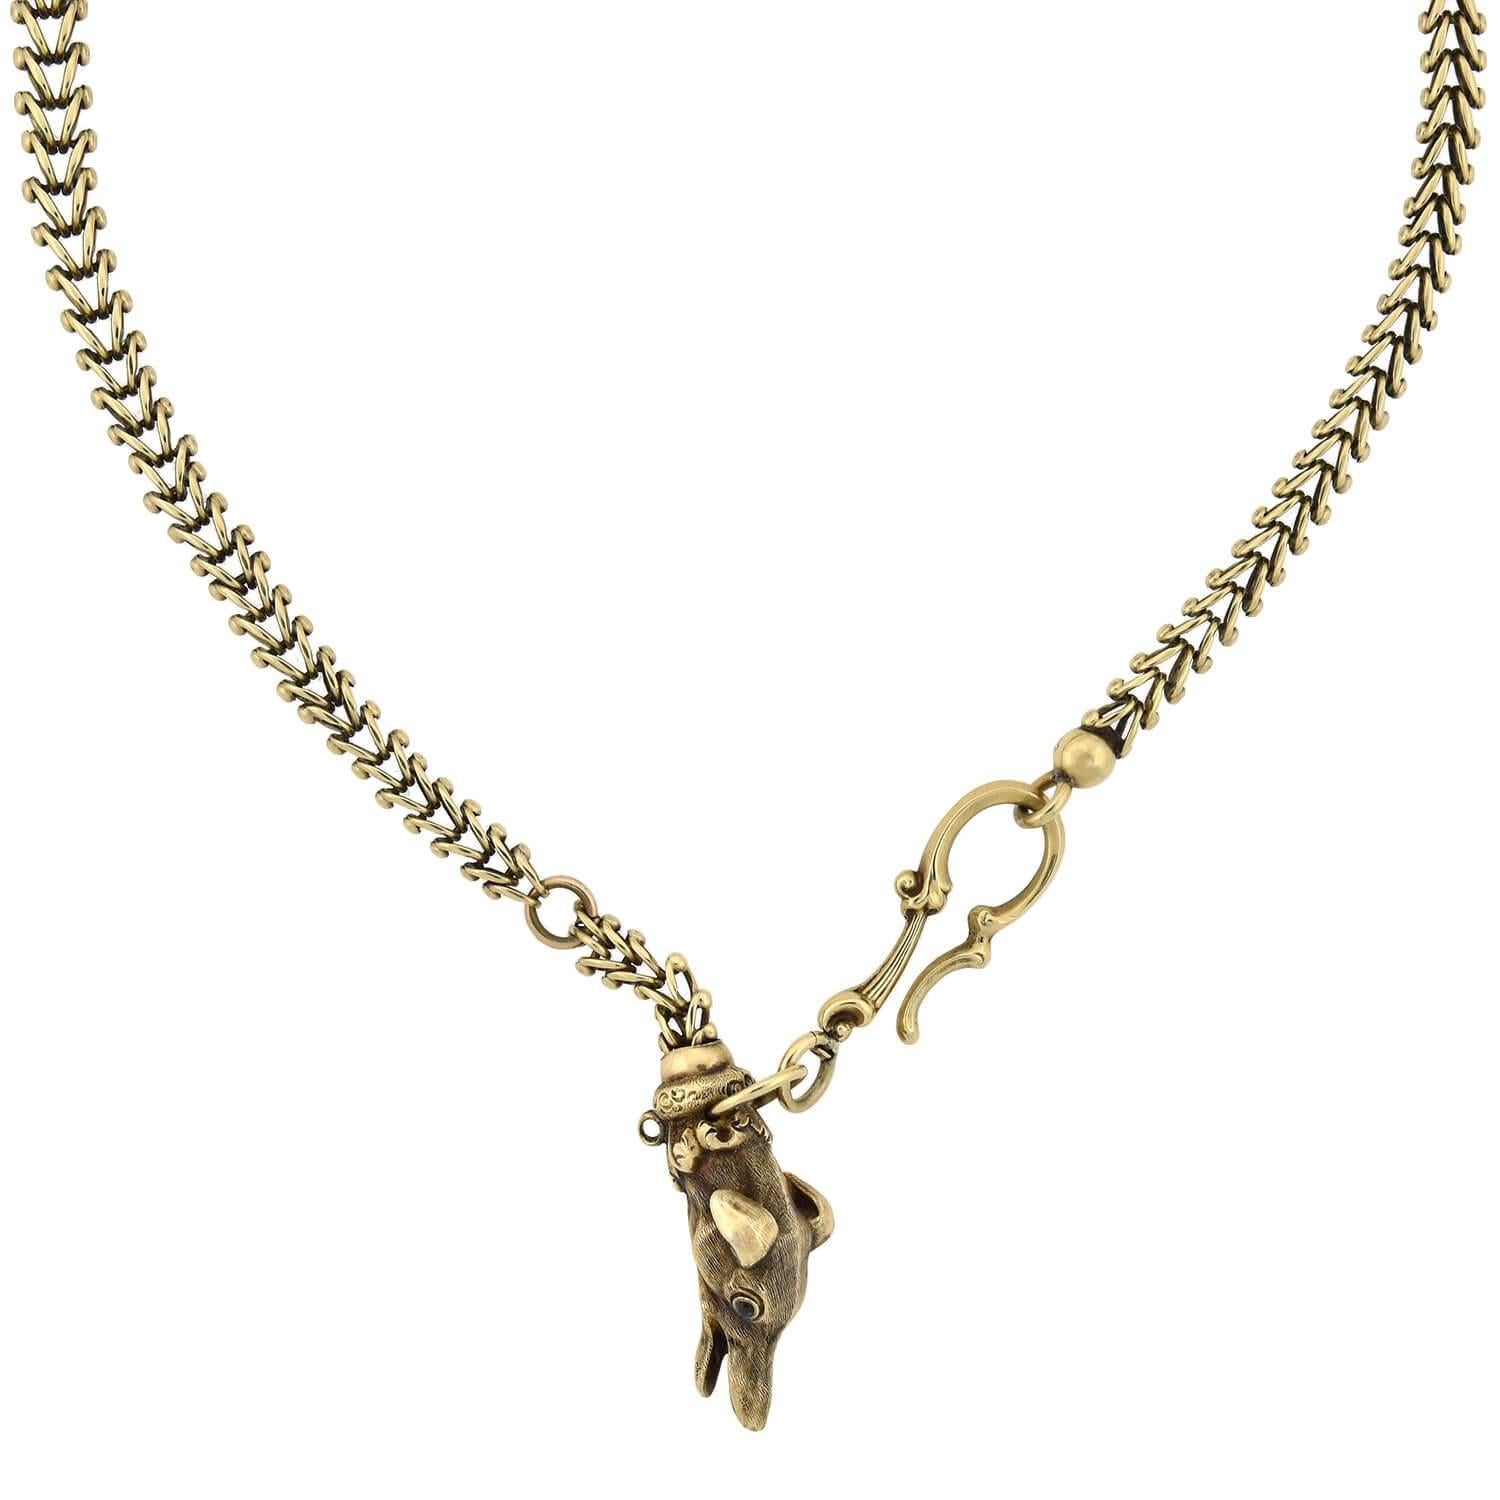 A unique and charming fob watch chain from the Victorian (ca1880) era! Crafted in 14kt yellow gold, this gorgeous pieces features a wonderful 3-dimensional fob that hangs from the end of an ornate chain. The highly detailed figural fob depicts the